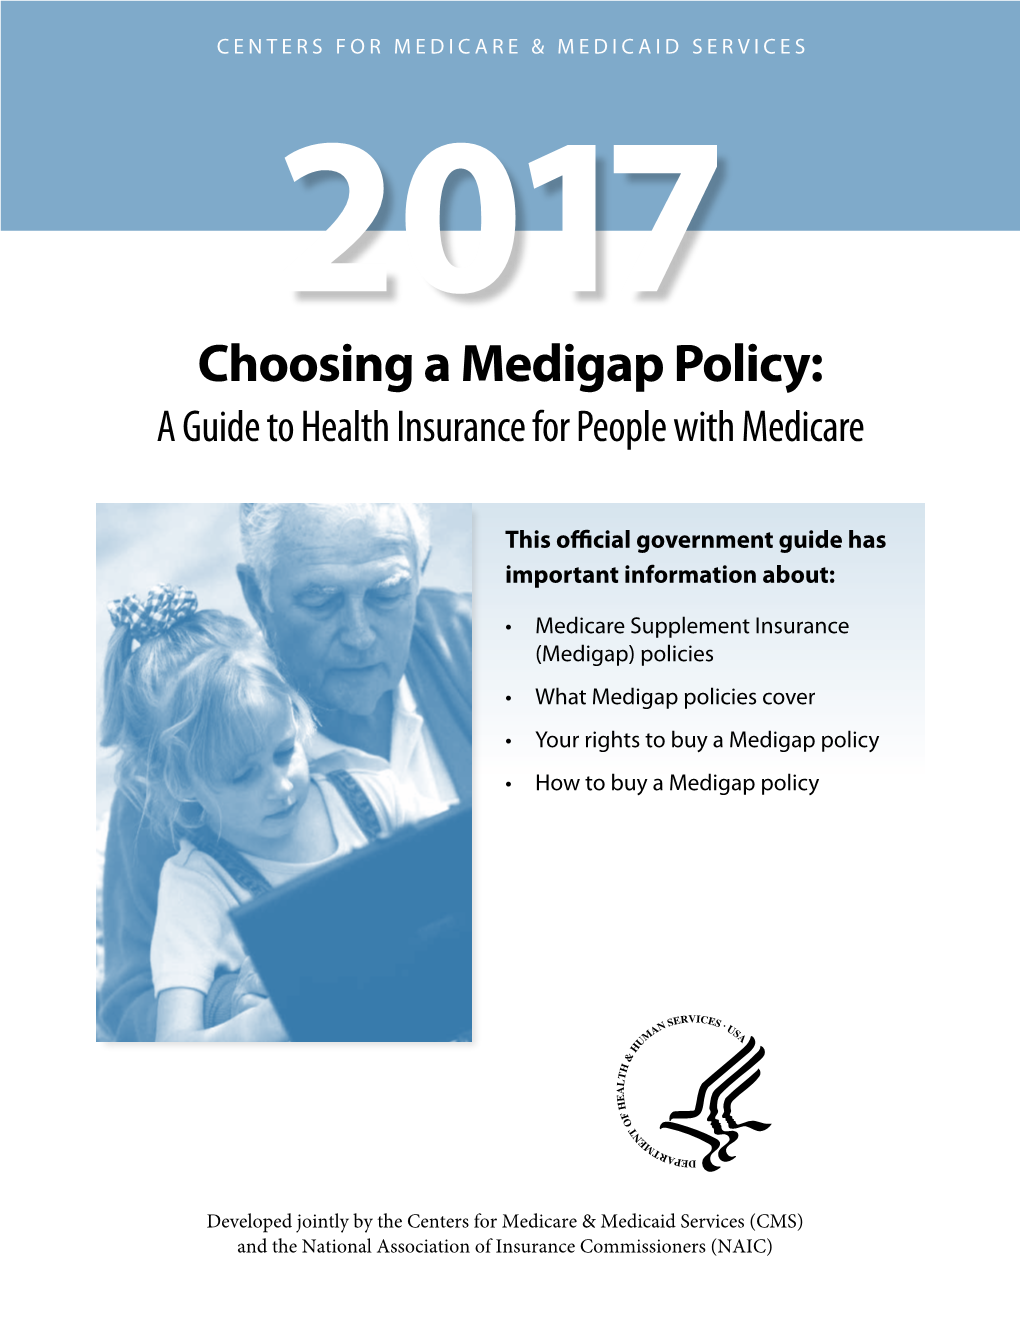 2017 Choosing a Medigap Policy: a Guide to Health Insurance for People with Medicare” Isn’T a Legal Document